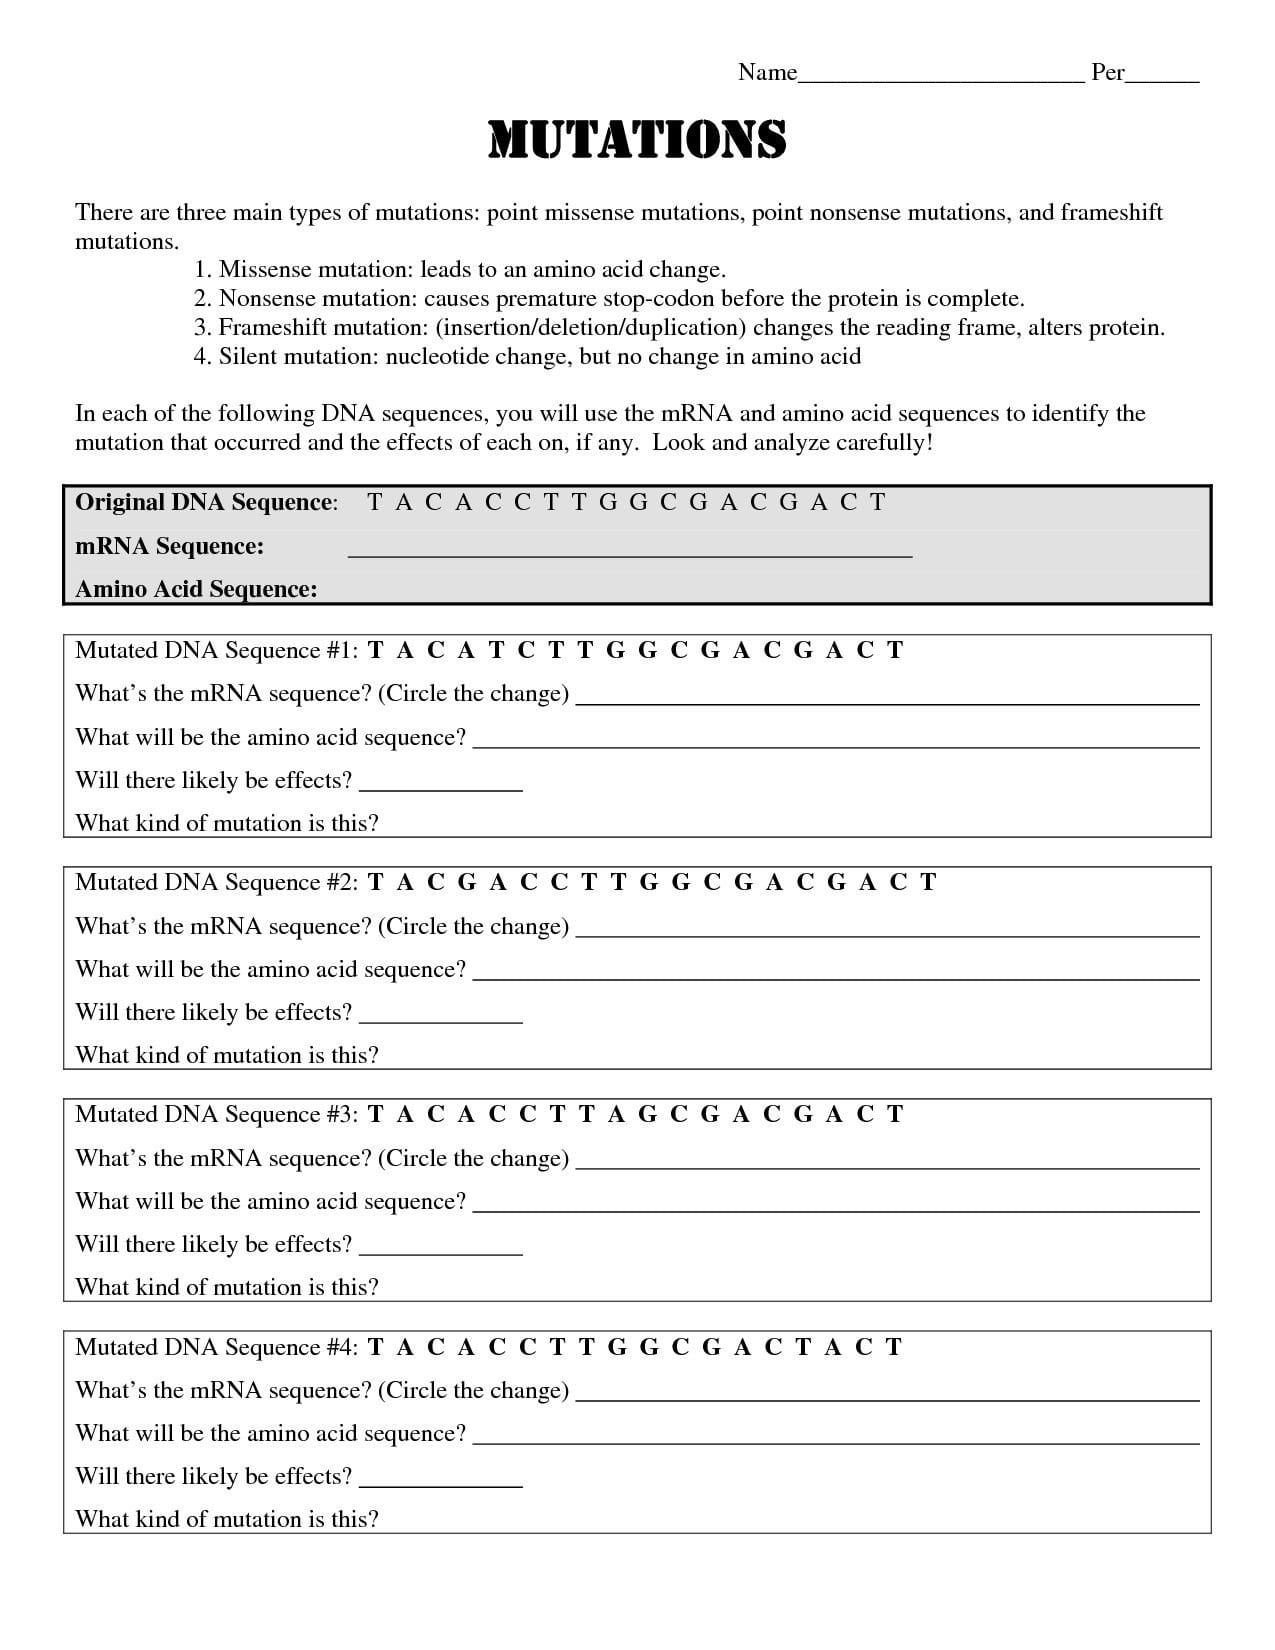 Sickle Cell Anemia Worksheet Answers  Briefencounters Or Sickle Cell Anemia Worksheet Answers